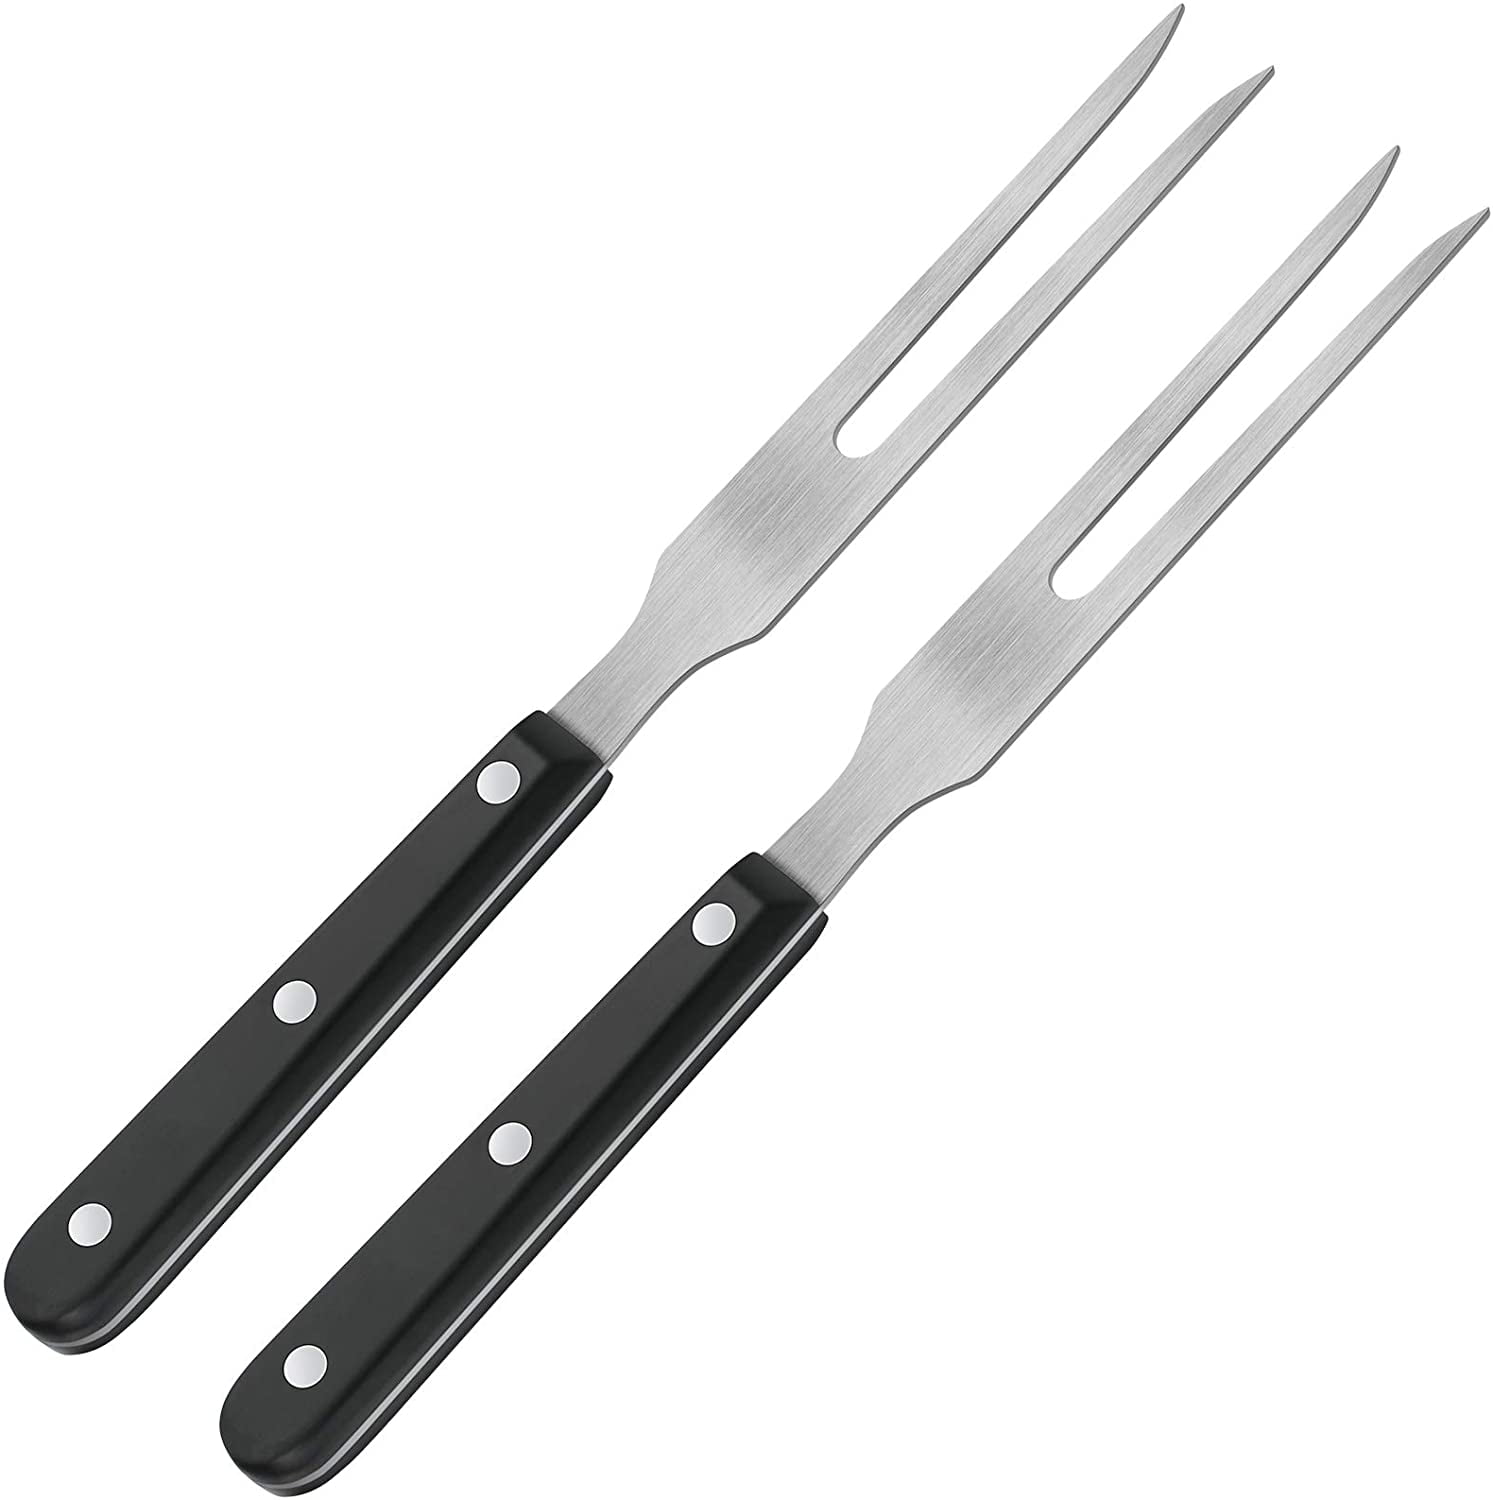 BBQ Tool Meat Carver Forks for Grill OFXDD Long Handled Stainless Steel Carving Fork for Barbeque Pack of 2